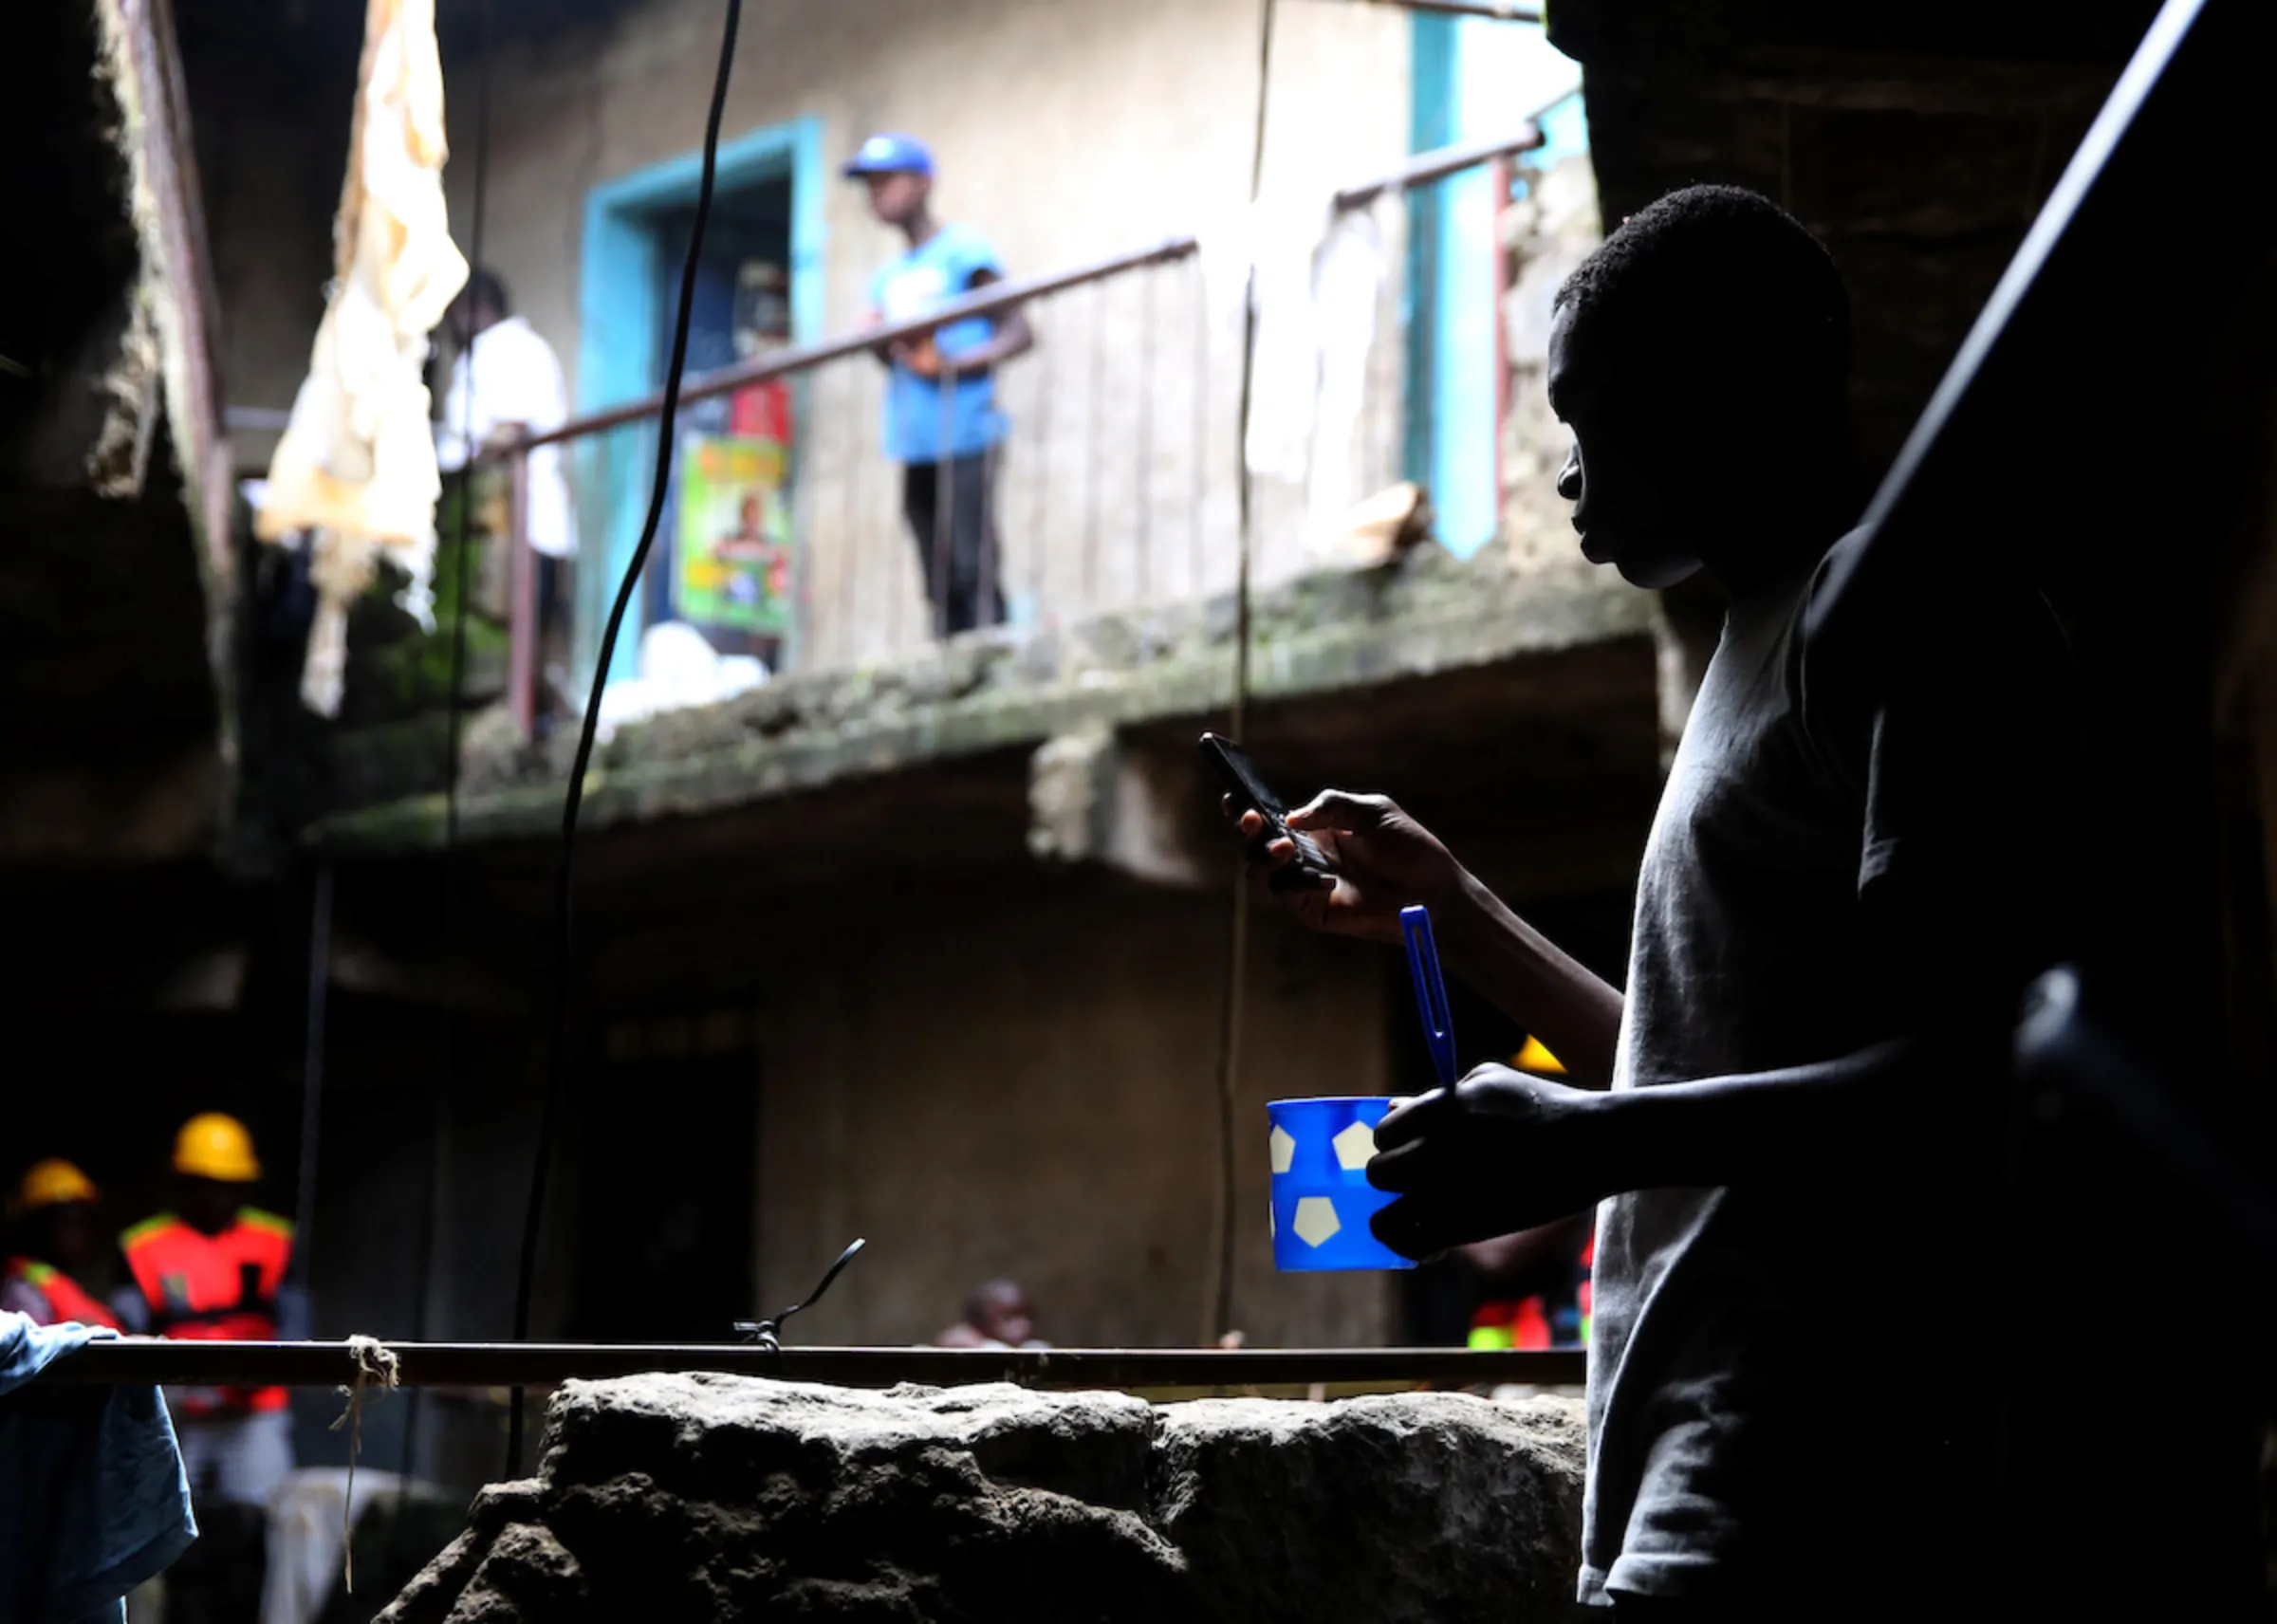 A man uses a cell phone in a building in the Mathare neighbourhood of Nairobi, Kenya, May 17, 2016